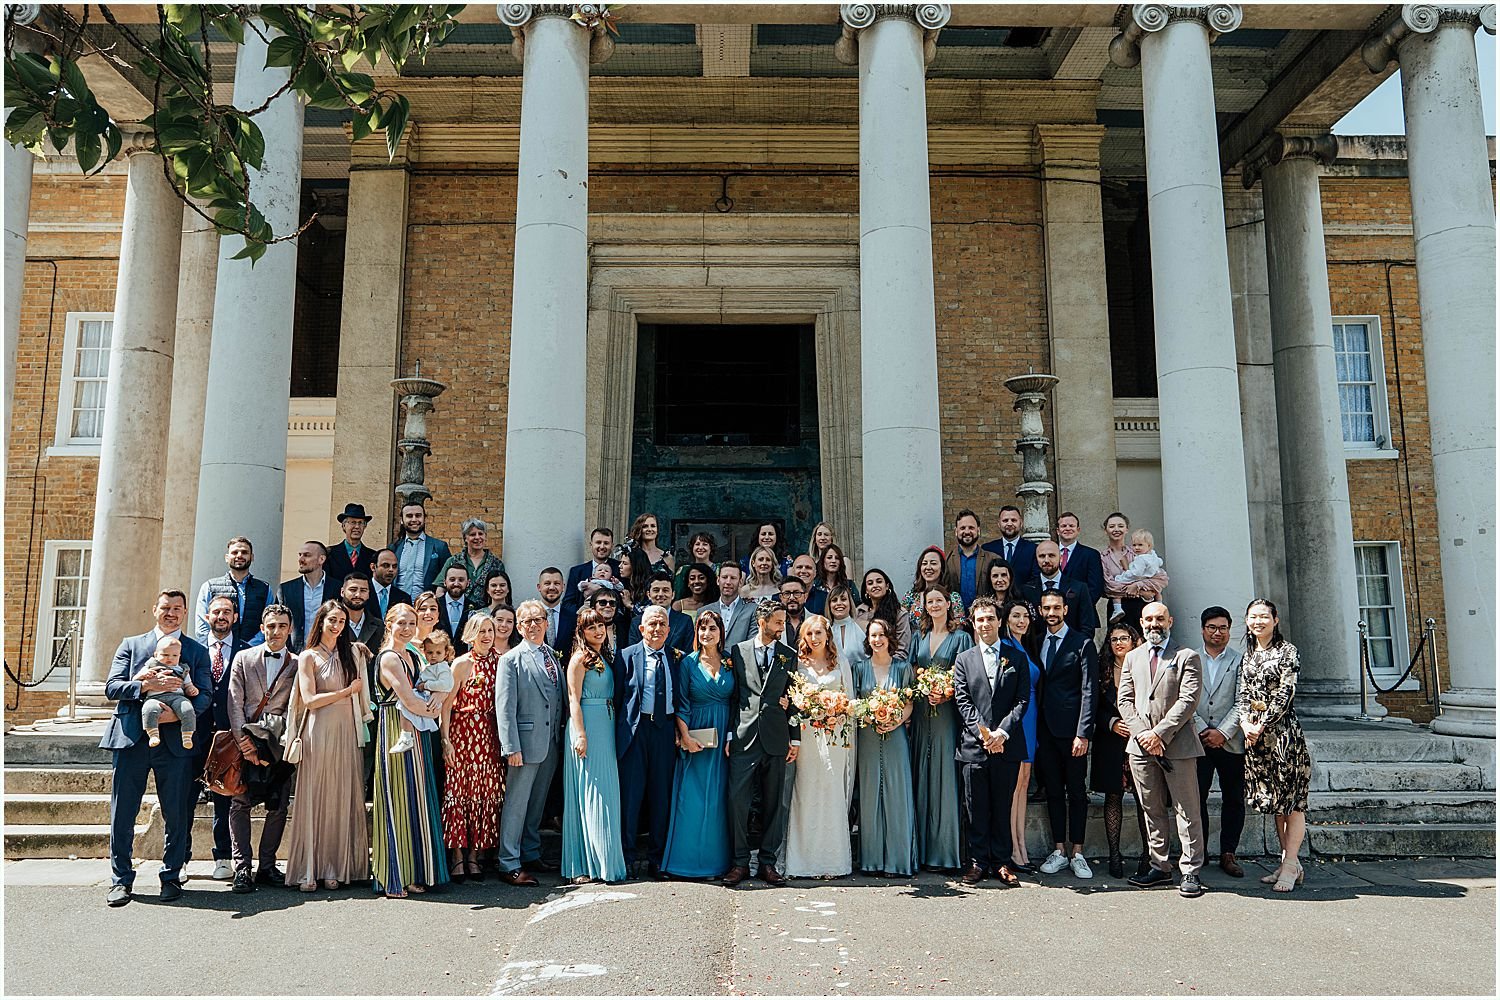 Group photo of wedding guests outside Asylum Chapel in Southeast London